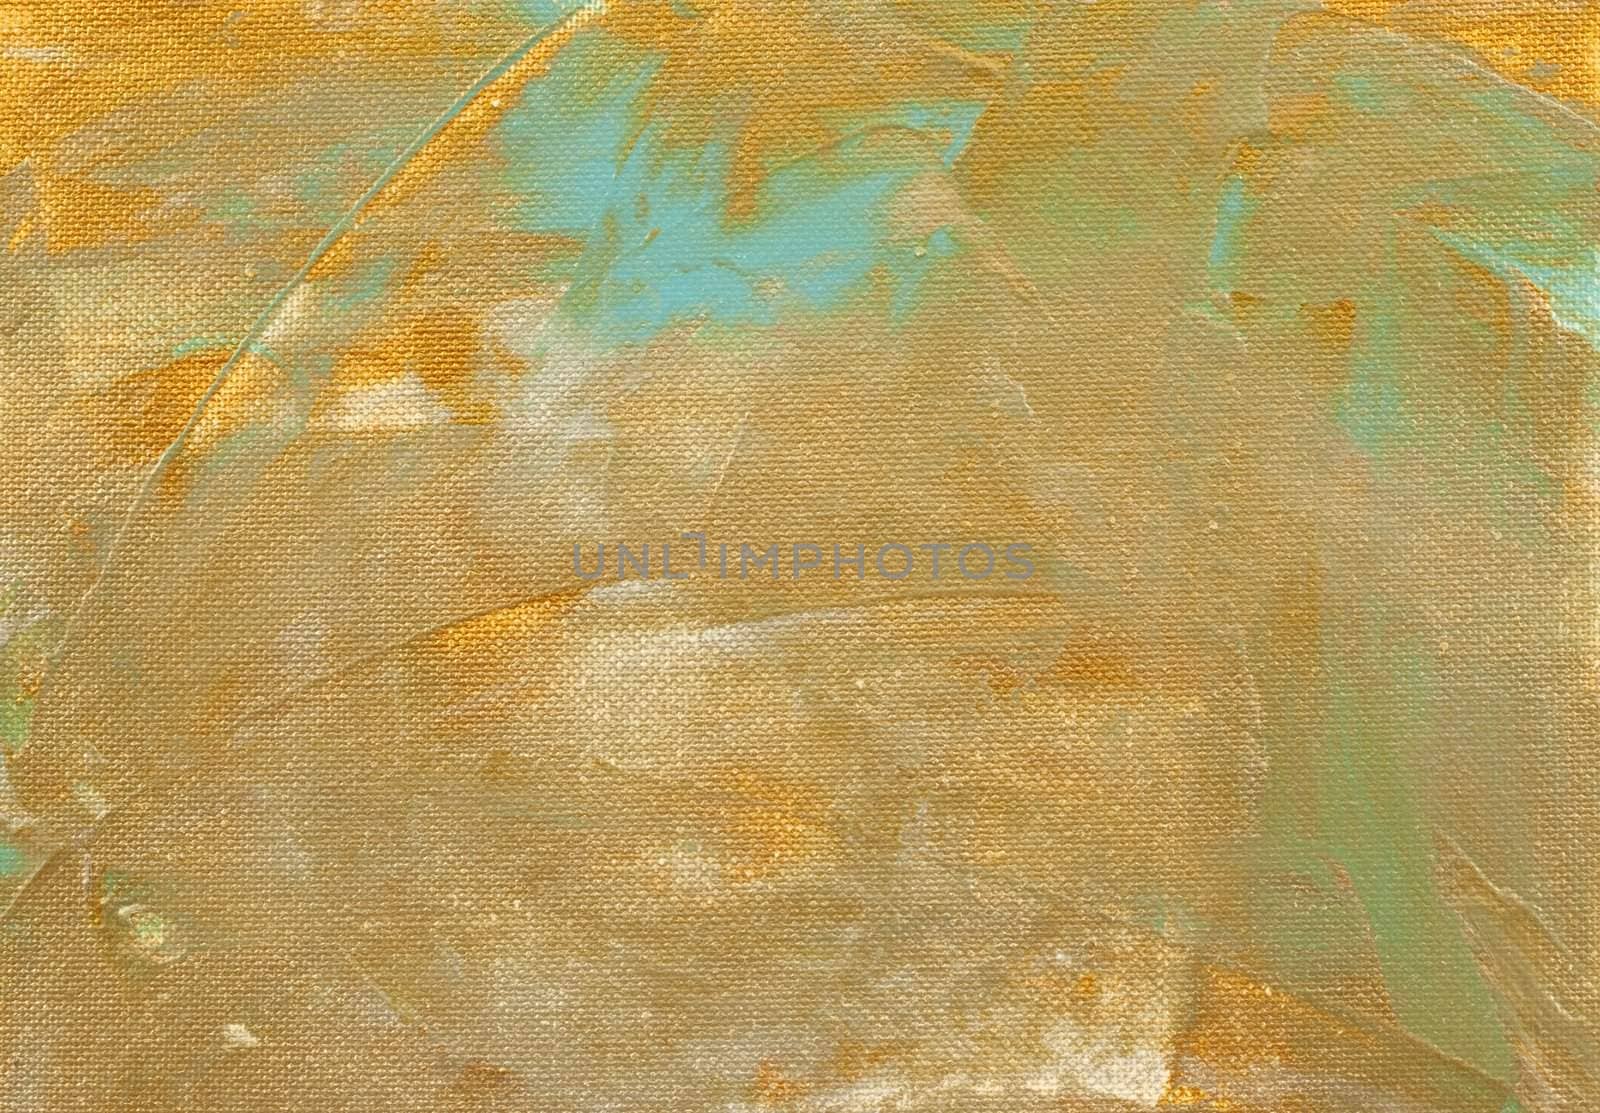 Golden acryl painting on canvas, abstract with blue and green